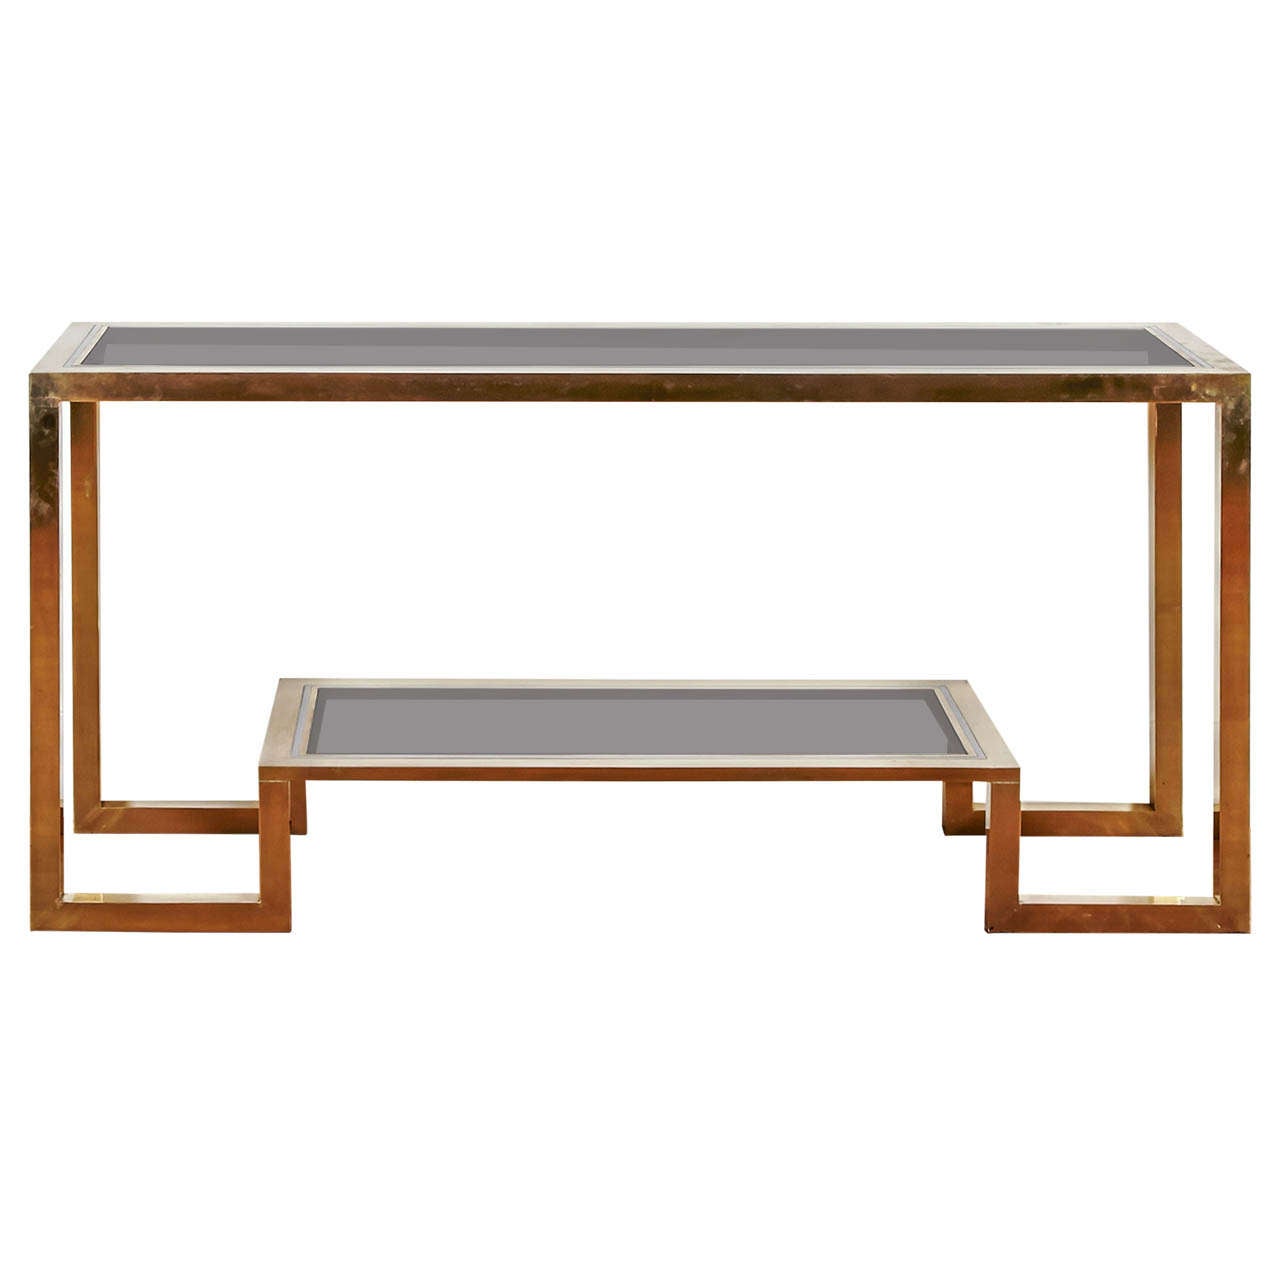 Important gilt brass and chromed steel console table, by Romeo Rega, Italy, 1970s.
Two smoked glass tops. Asymetrical Under shelf.